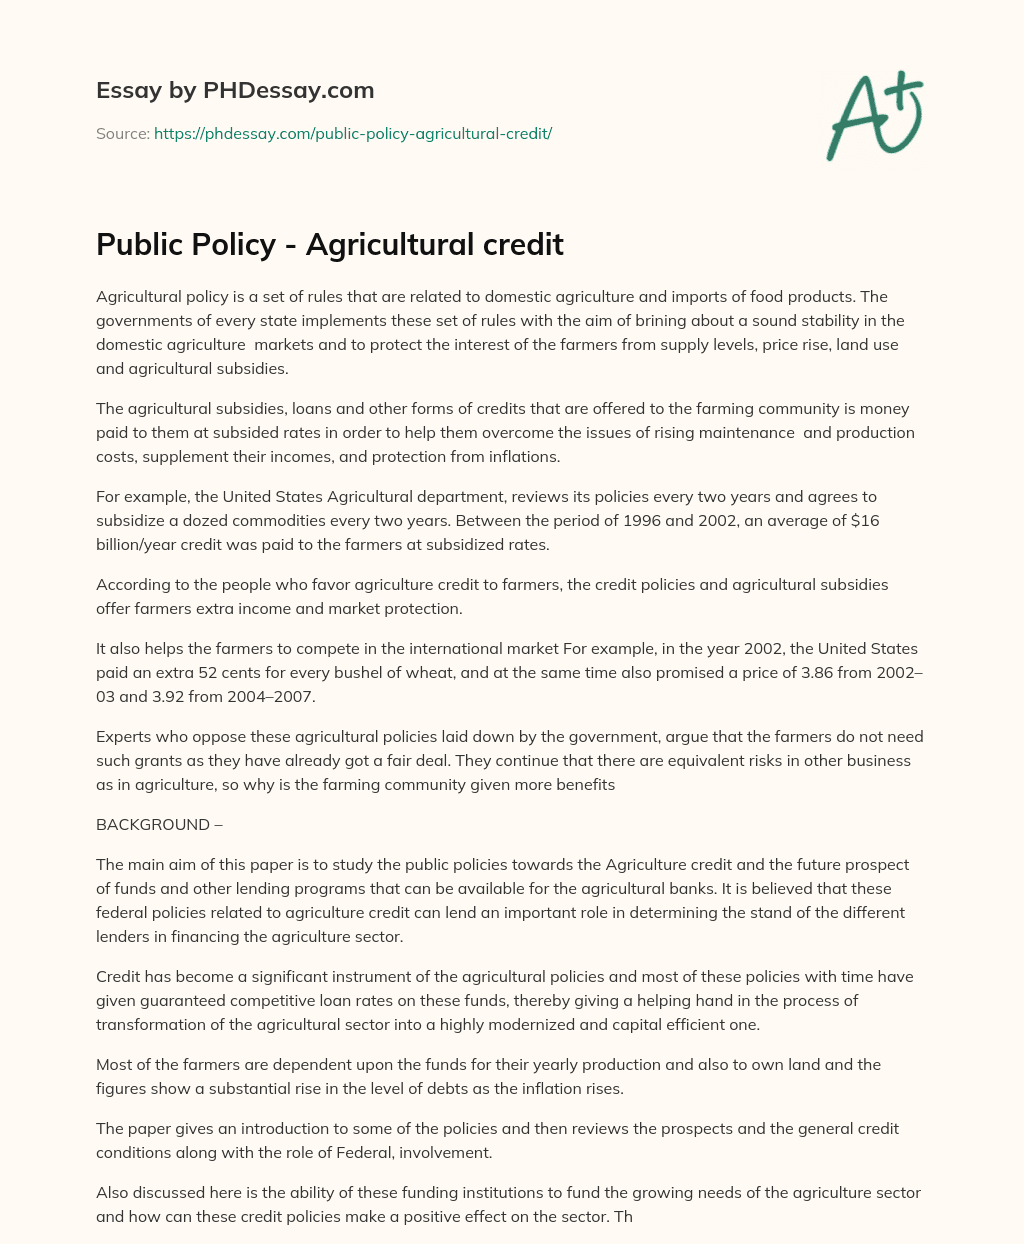 Public Policy – Agricultural credit essay